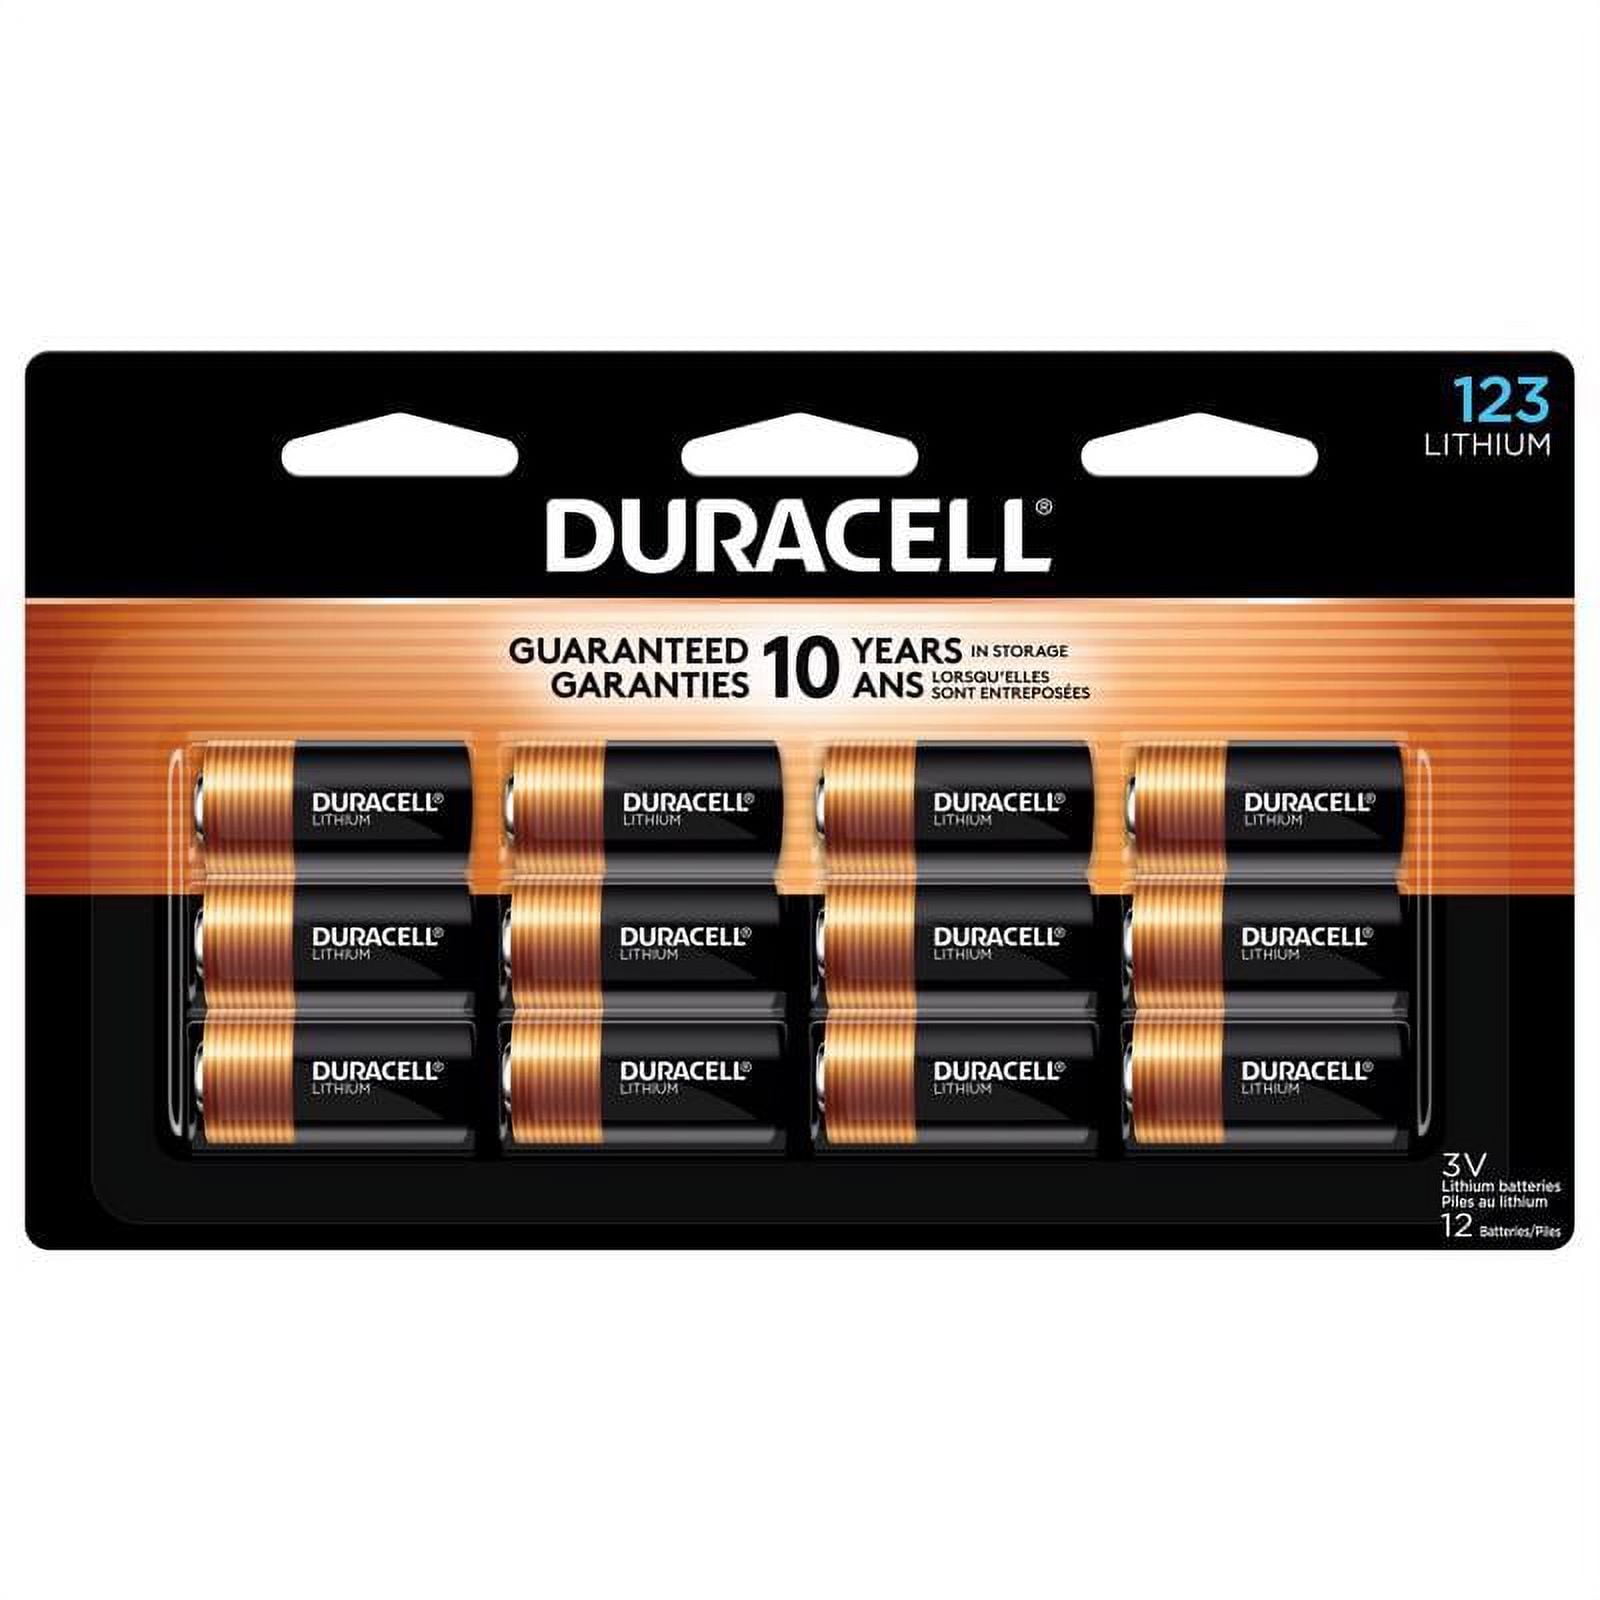 Duracell CR2 3V Lithium Battery, 1 Count Pack, CR2 3 Volt High Power  Lithium Battery, Long-Lasting for Video and Photo Cameras, Lighting  Equipment, and More : Health & Household 